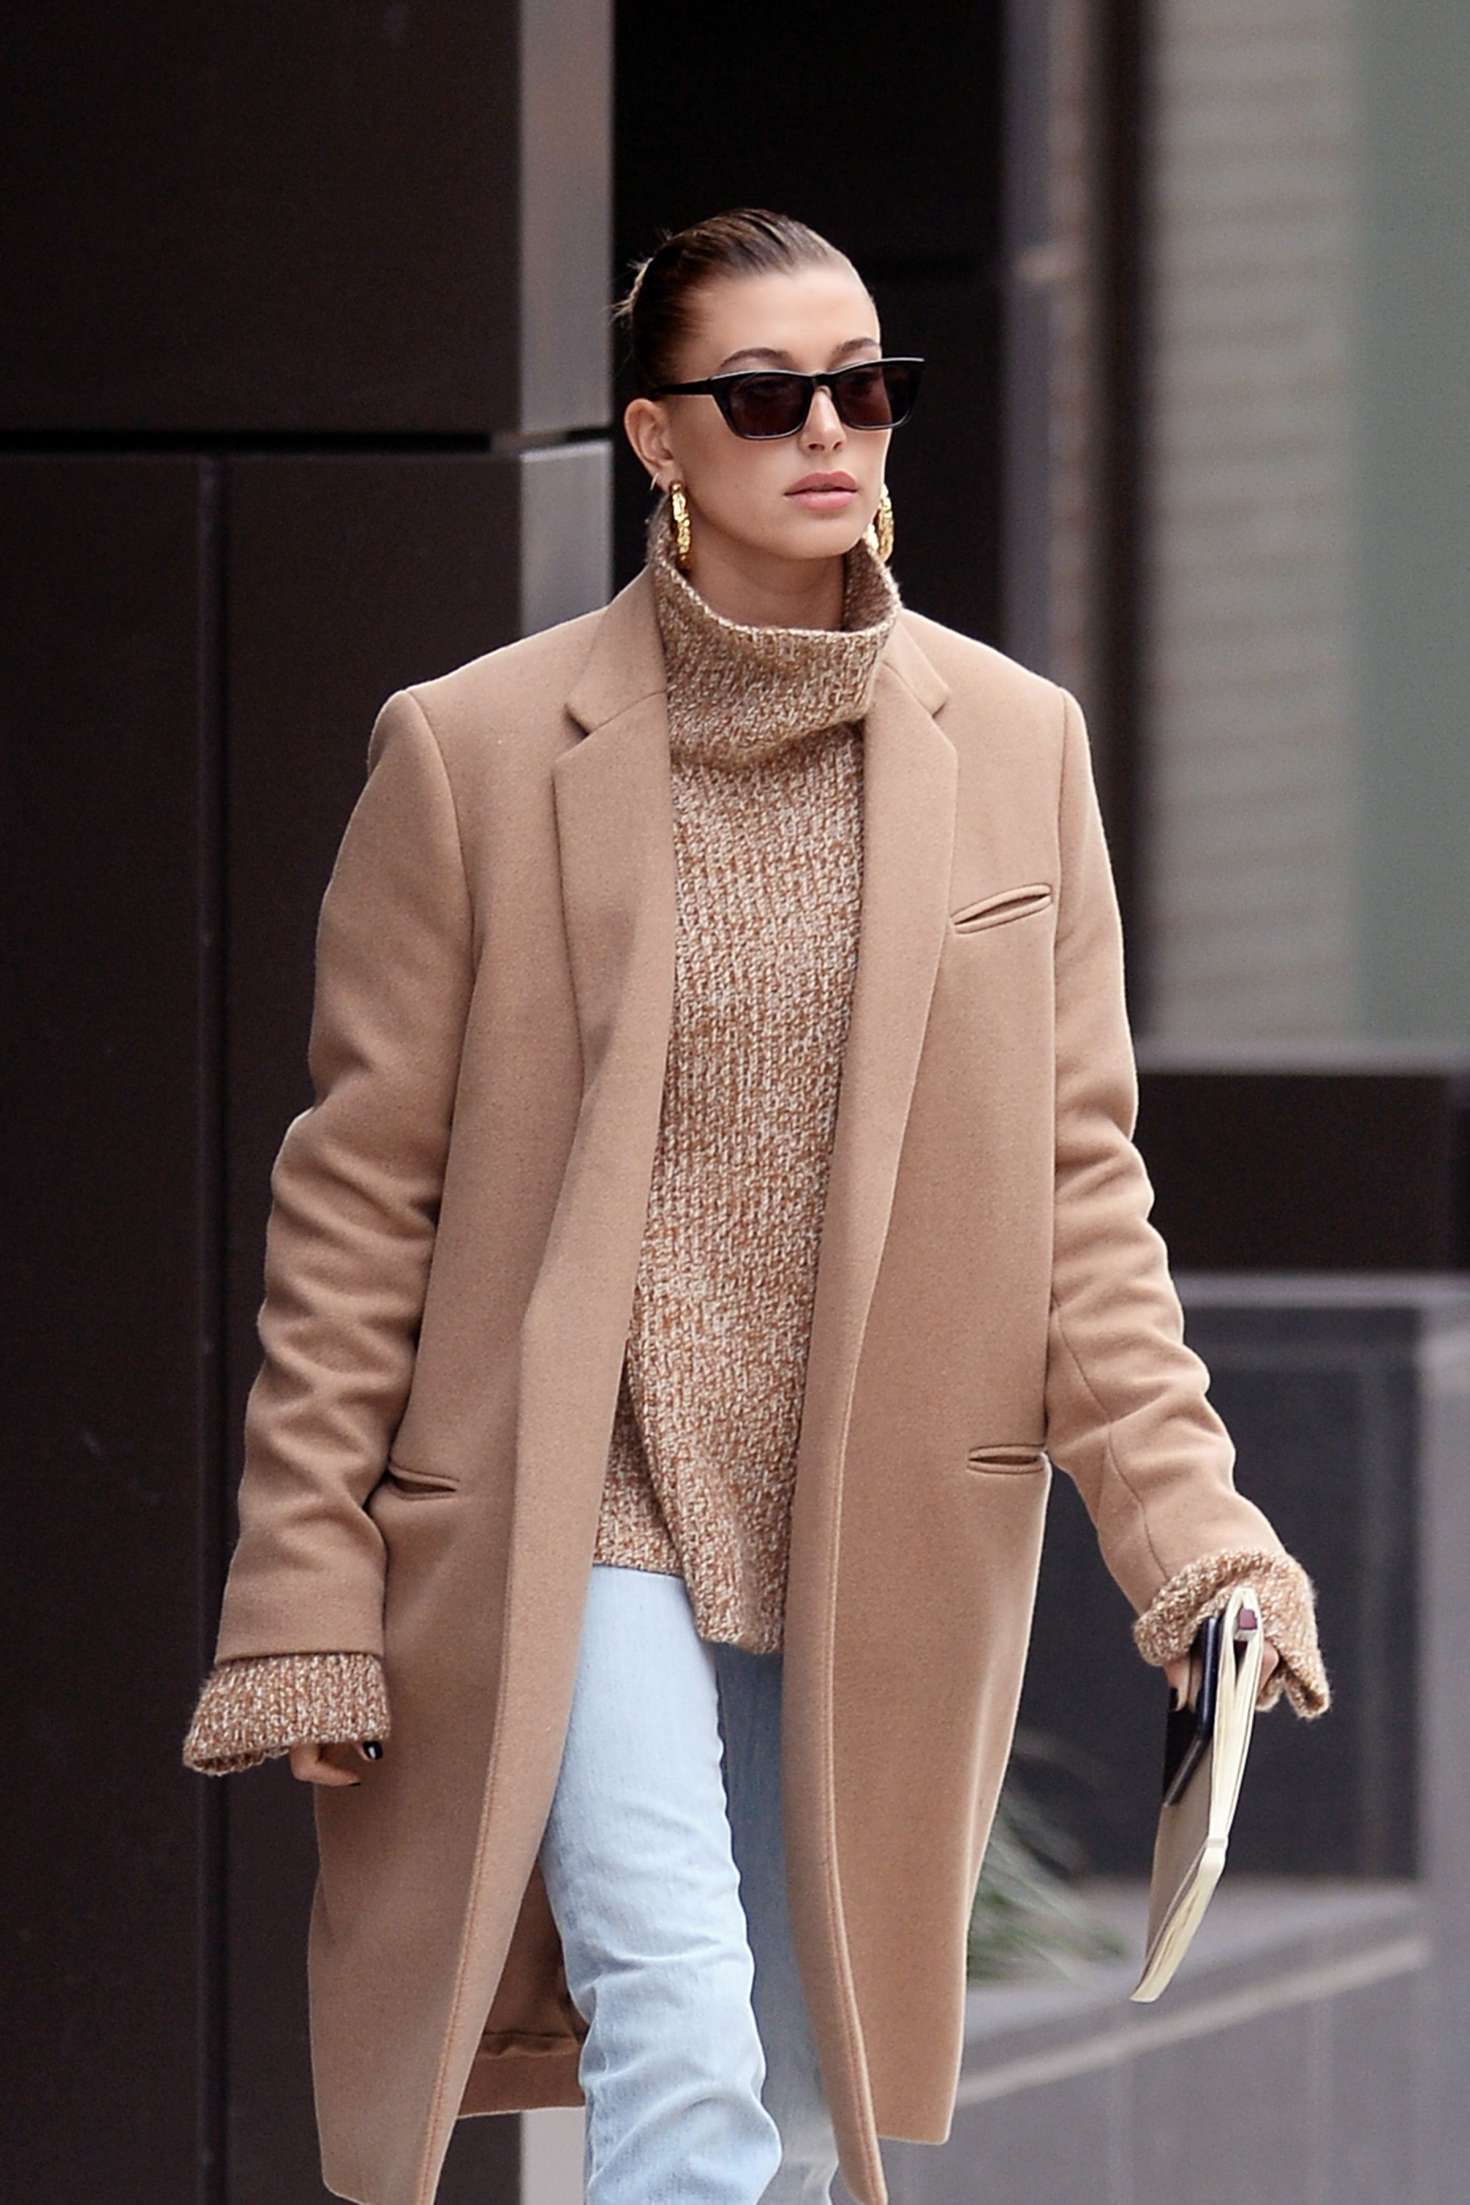 Hailey Baldwin â€“ Out and about in New York